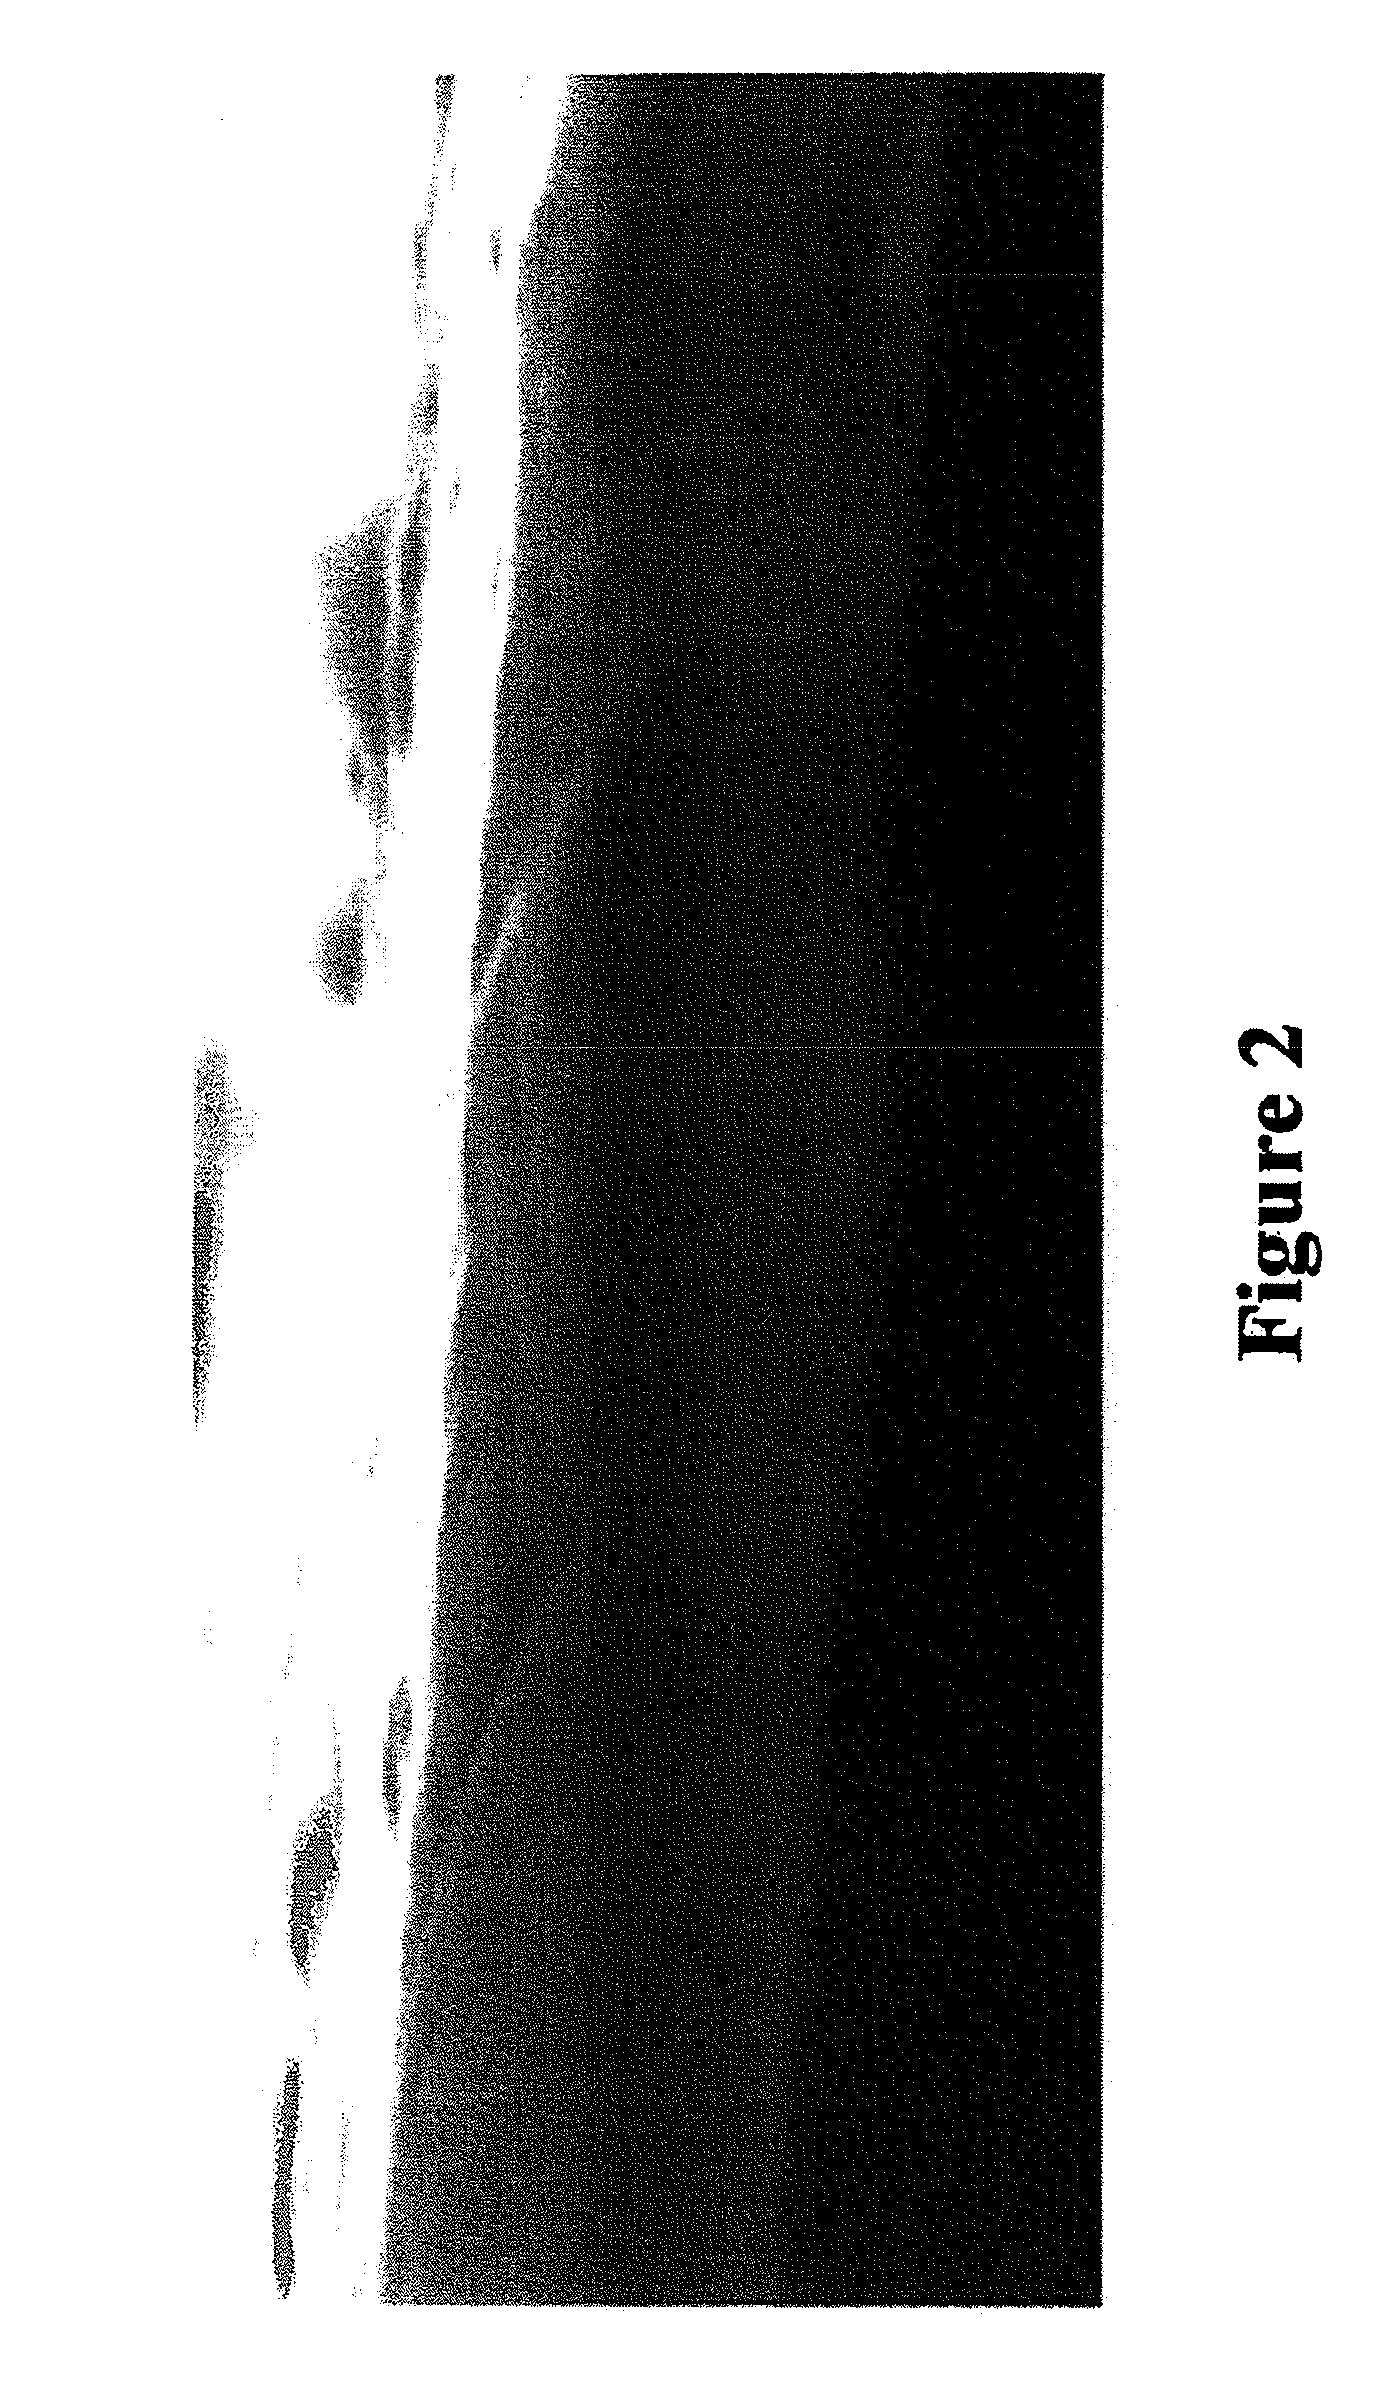 Method of making foraminous microstructures